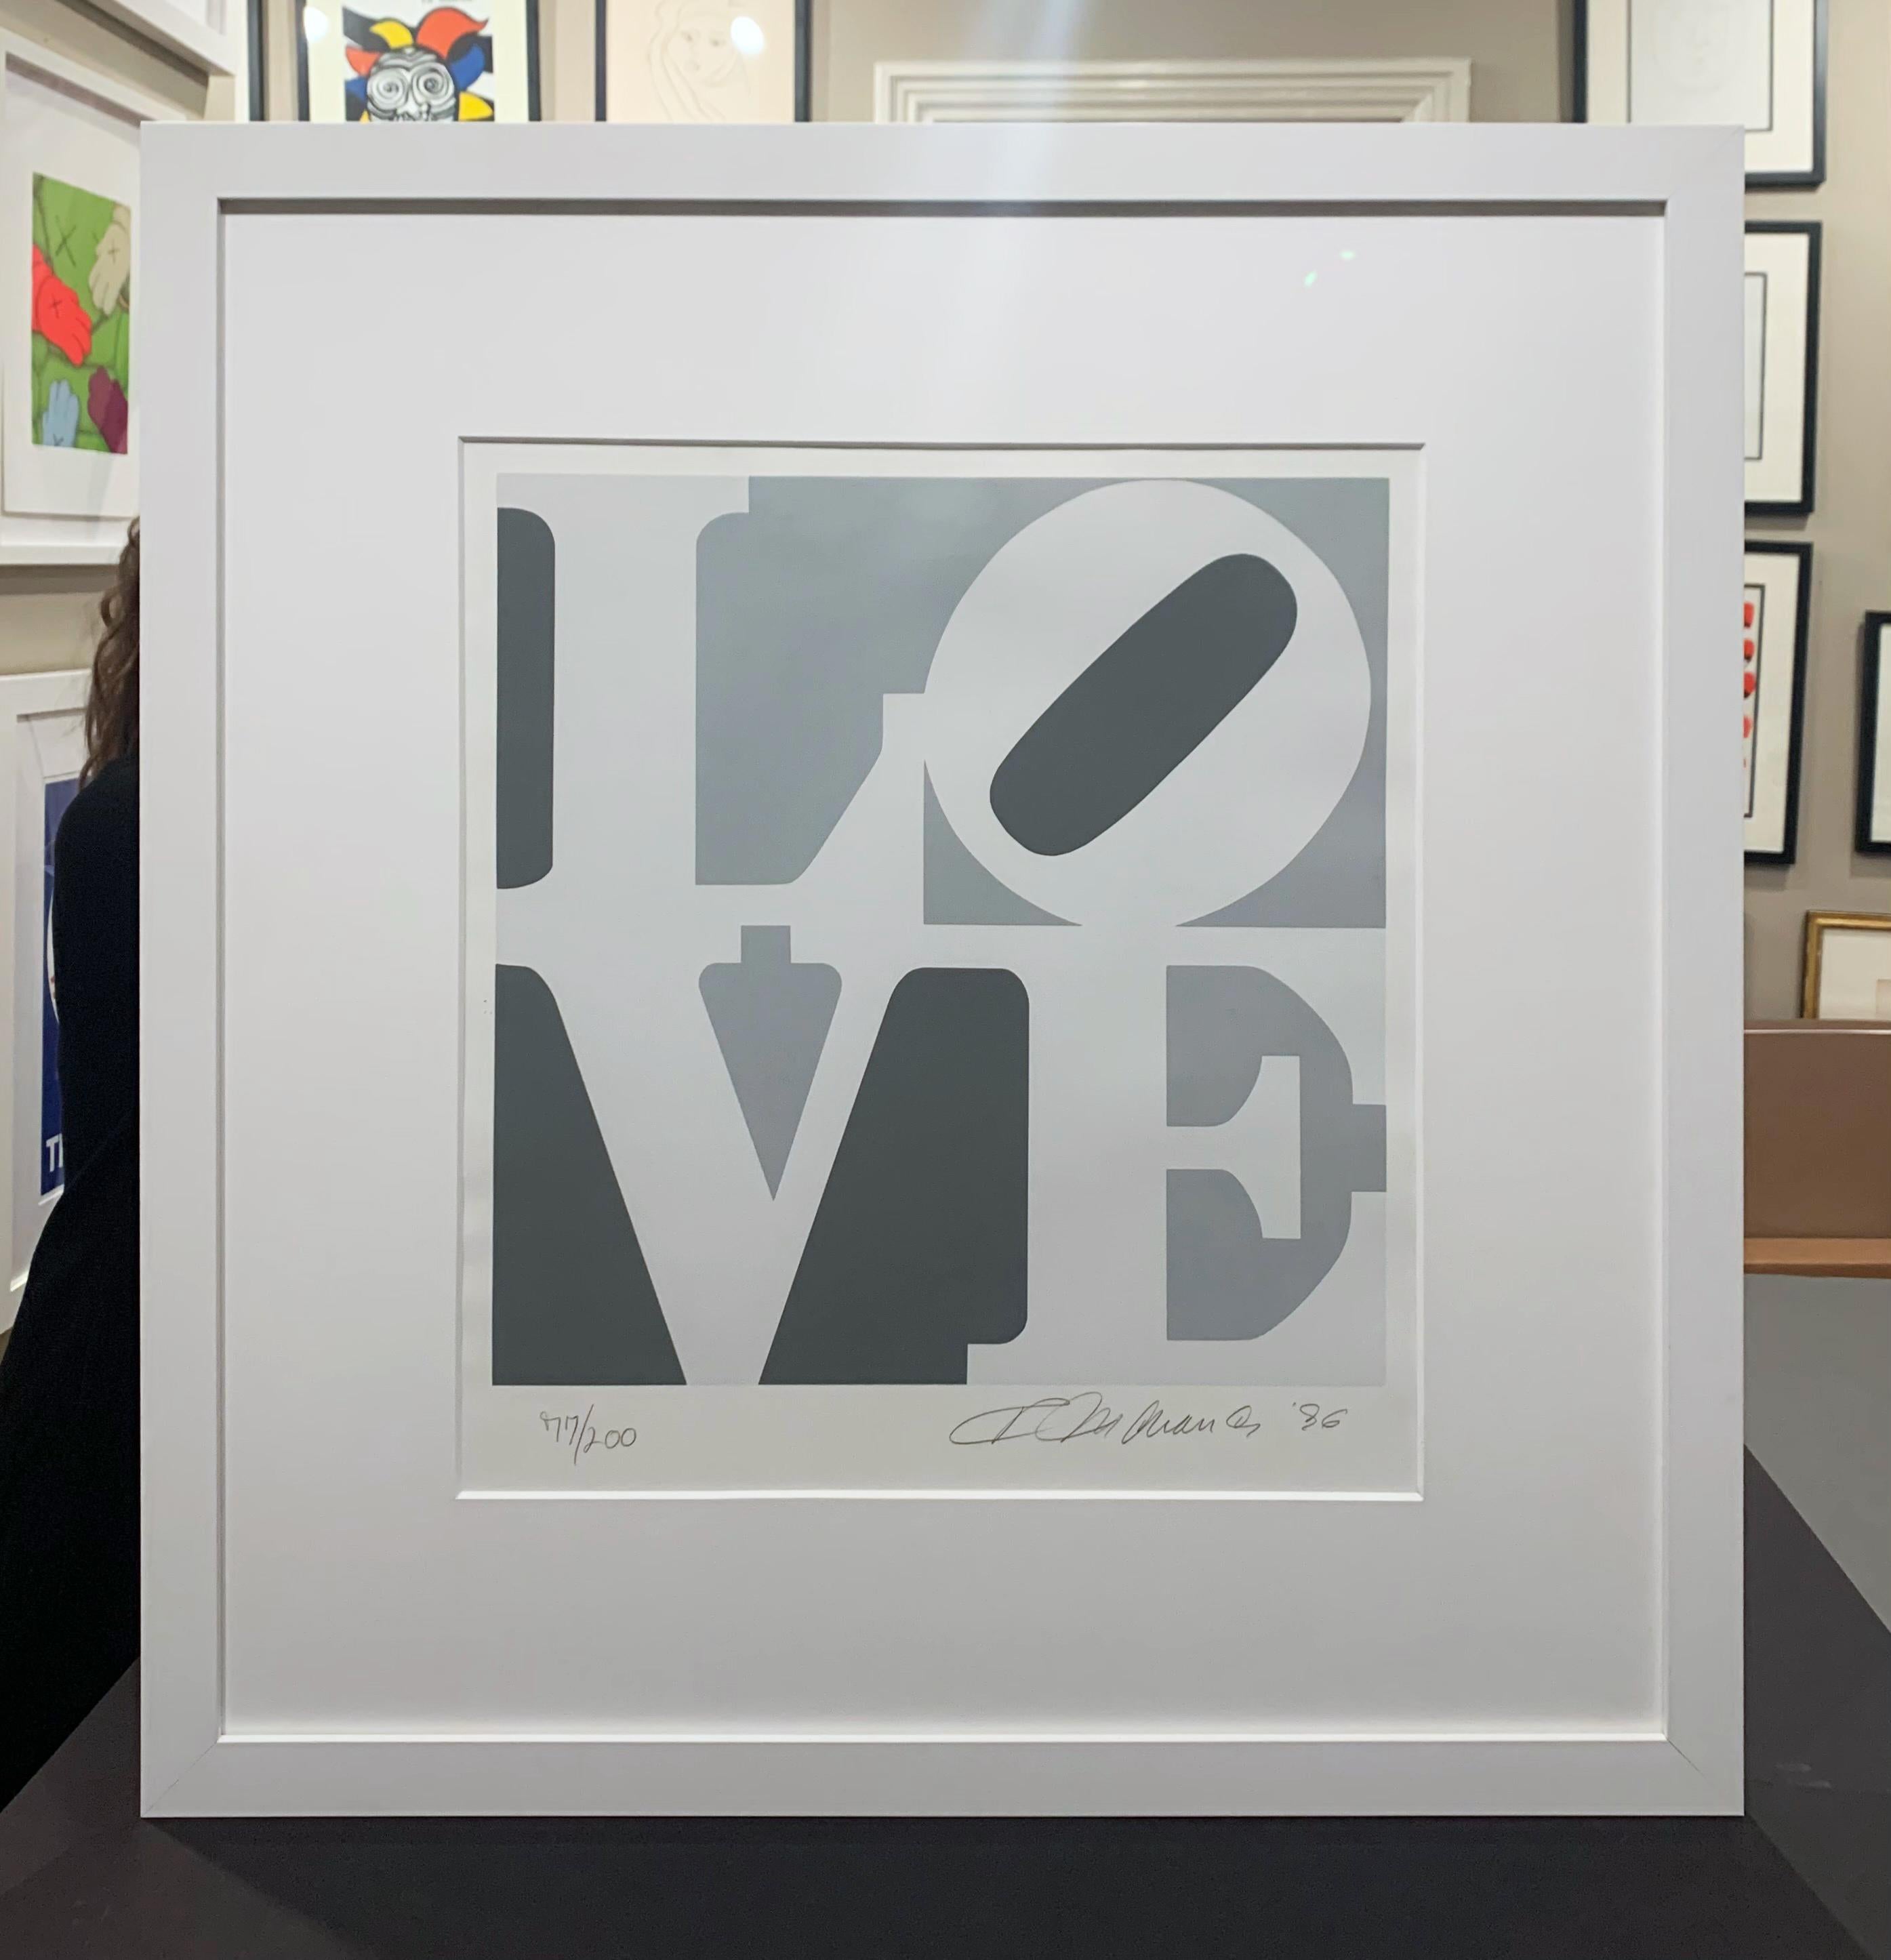 Artist: Robert Indiana
Medium: Serigraph
Title: The Book of Love 4
Year: 1996
Signed: Hand signed in pencil
Edition: 77/200
Framed Size: 37